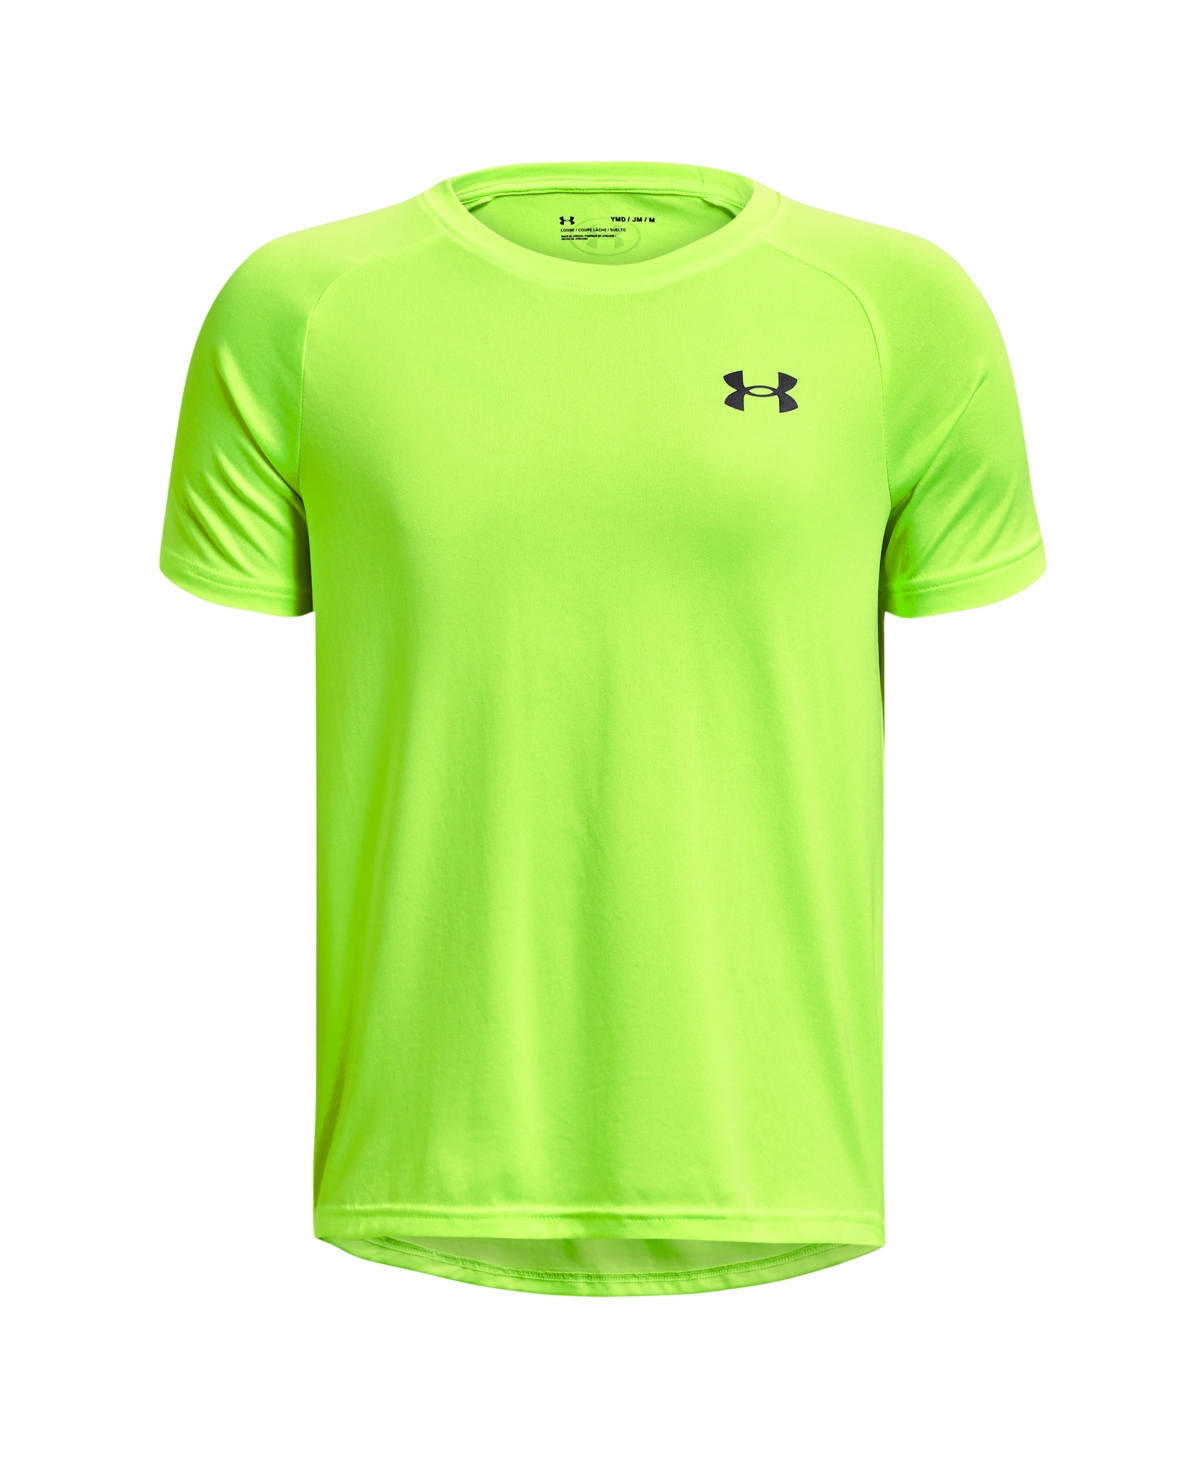 Under Armour Mens  Tech 2.0 Short Sleeve Novelty T-shirt In Lime/black